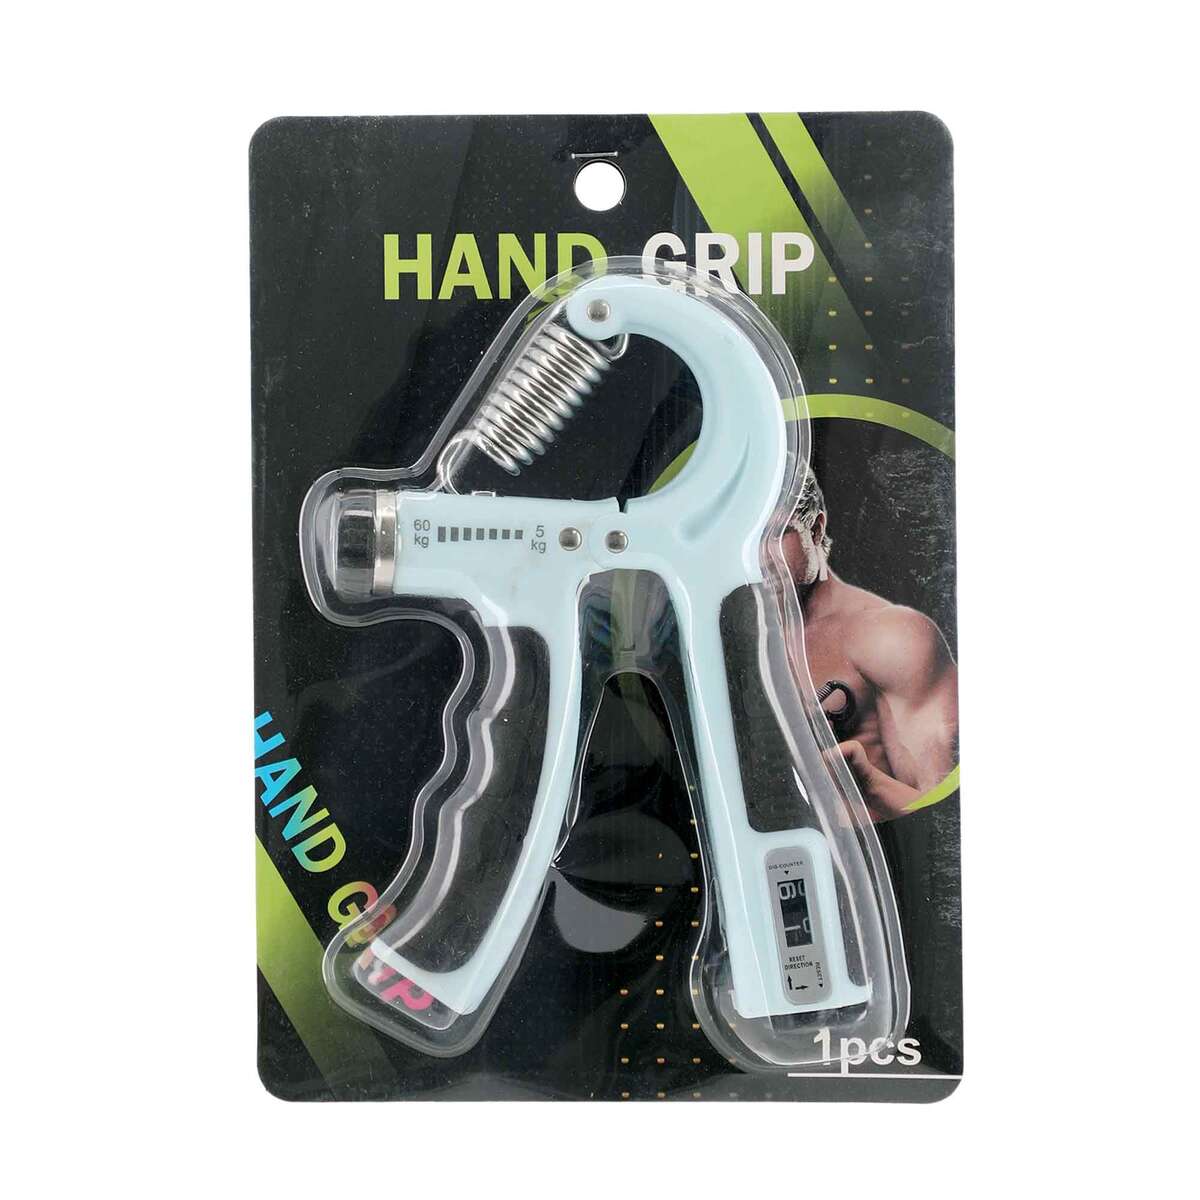 Sports INC Adjustable Hand Grip 25443-8, 1pc, Assorted Colors